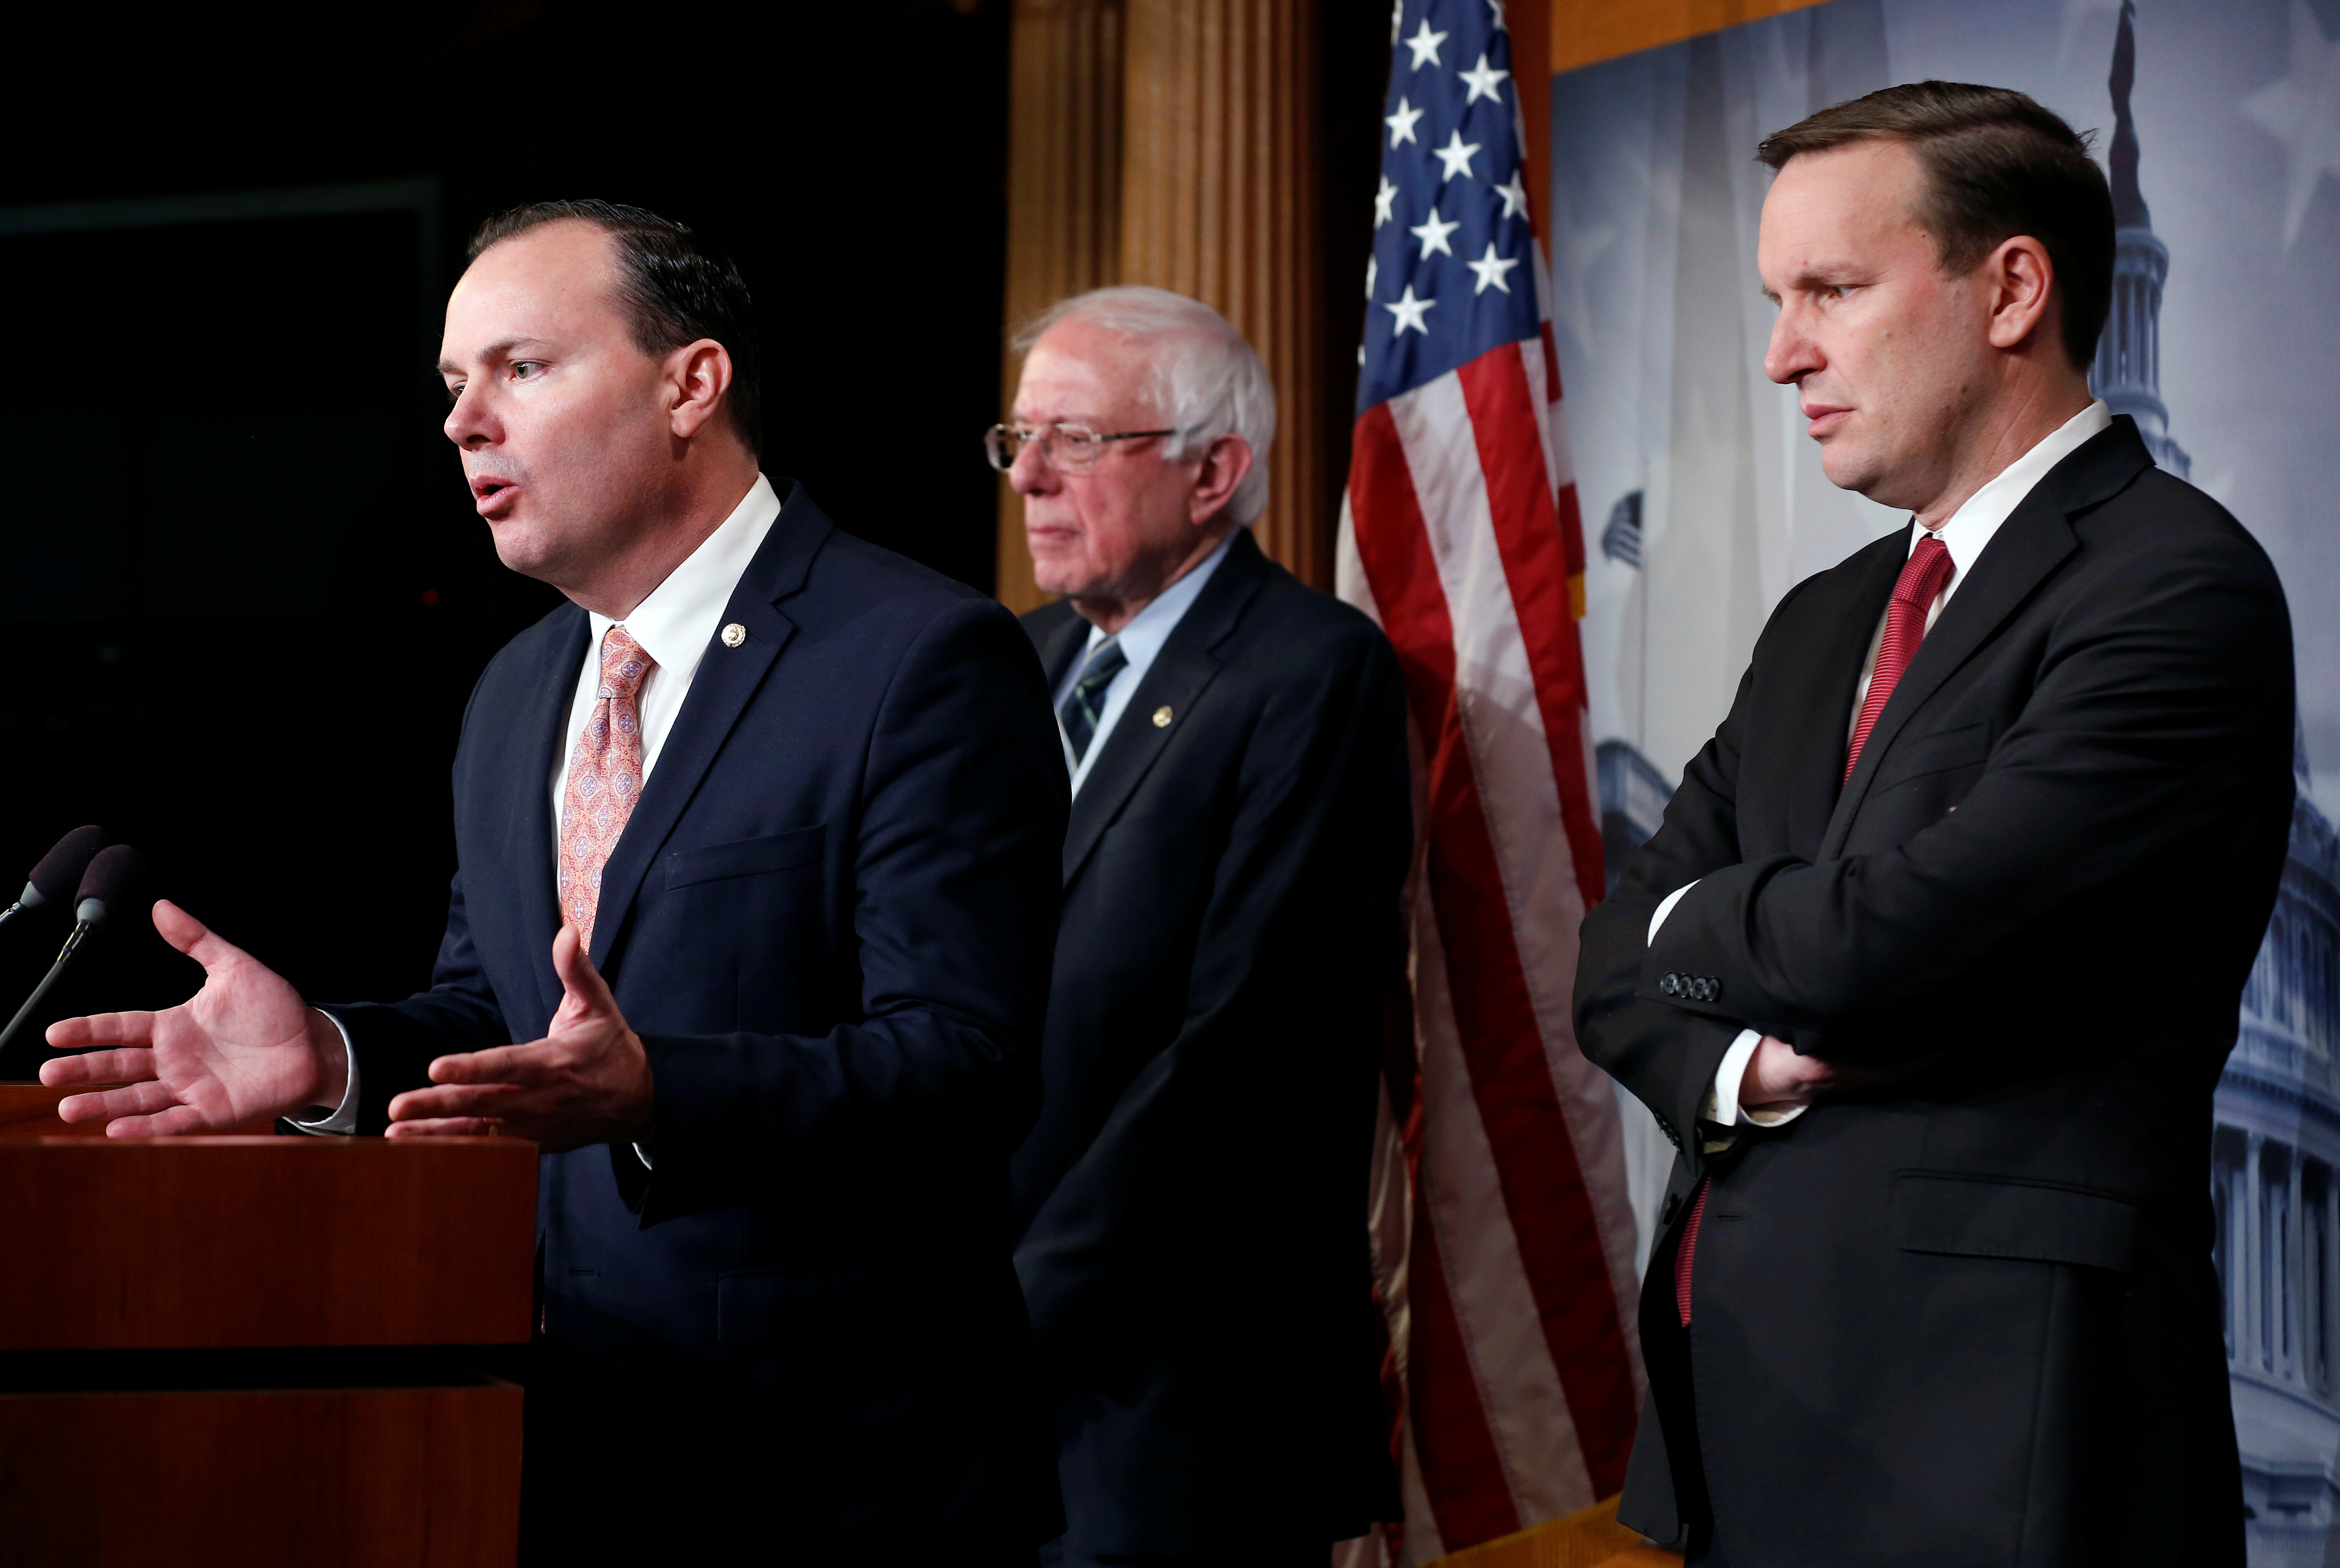 Senators Mike Lee (R-UT), Bernie Sanders (I-VT) and Chris Murphy (D-CT) speak after the senate voted on a resolution ending U.S. military support for the war in Yemen on Capitol Hill in Washington, U.S., December 13, 2018.      REUTERS/Joshua Roberts